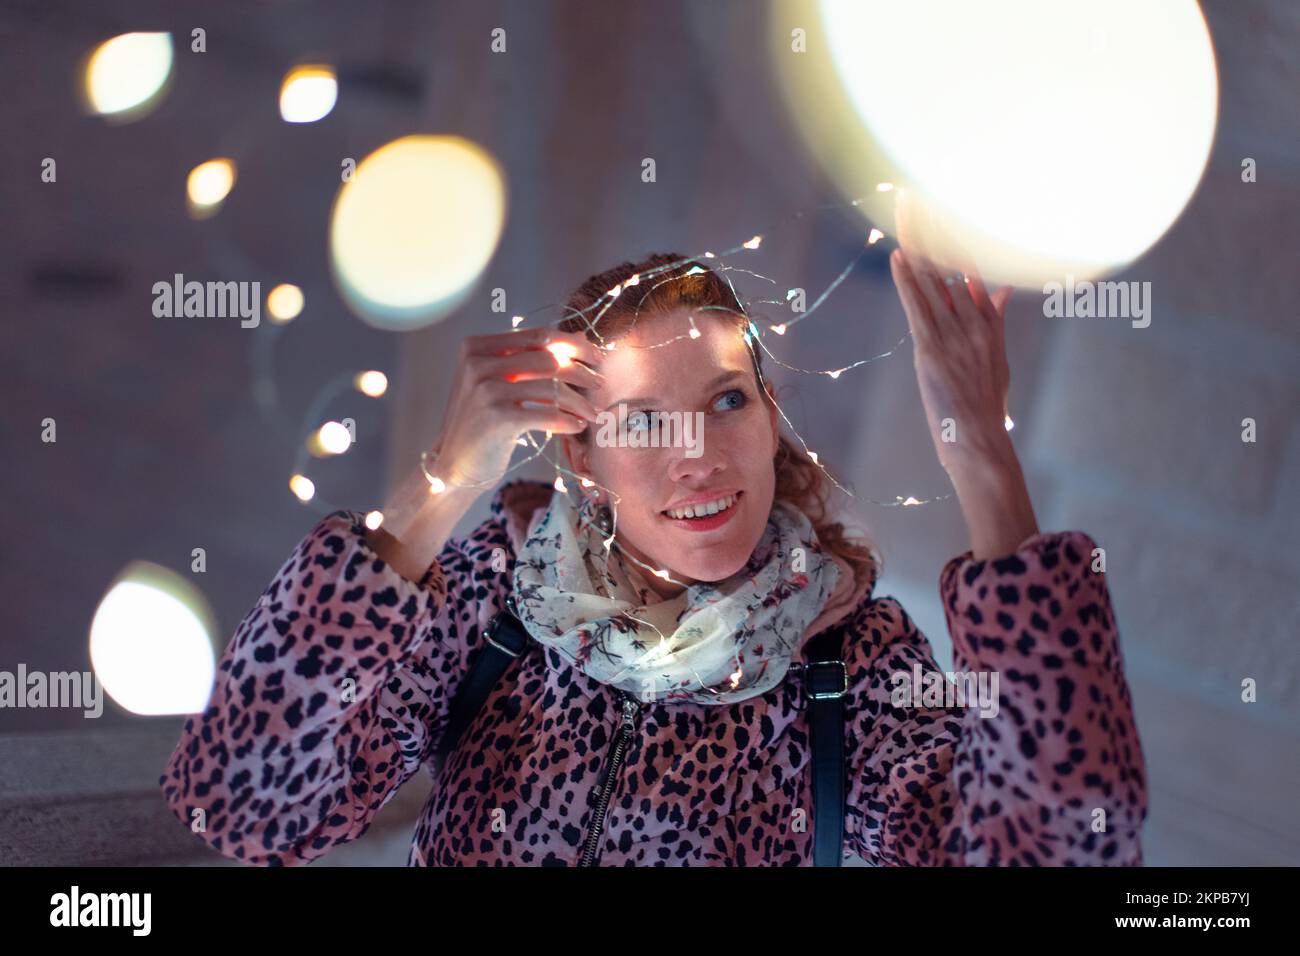 Young 30s Caucasian woman holding LED garland light outdoors Stock Photo